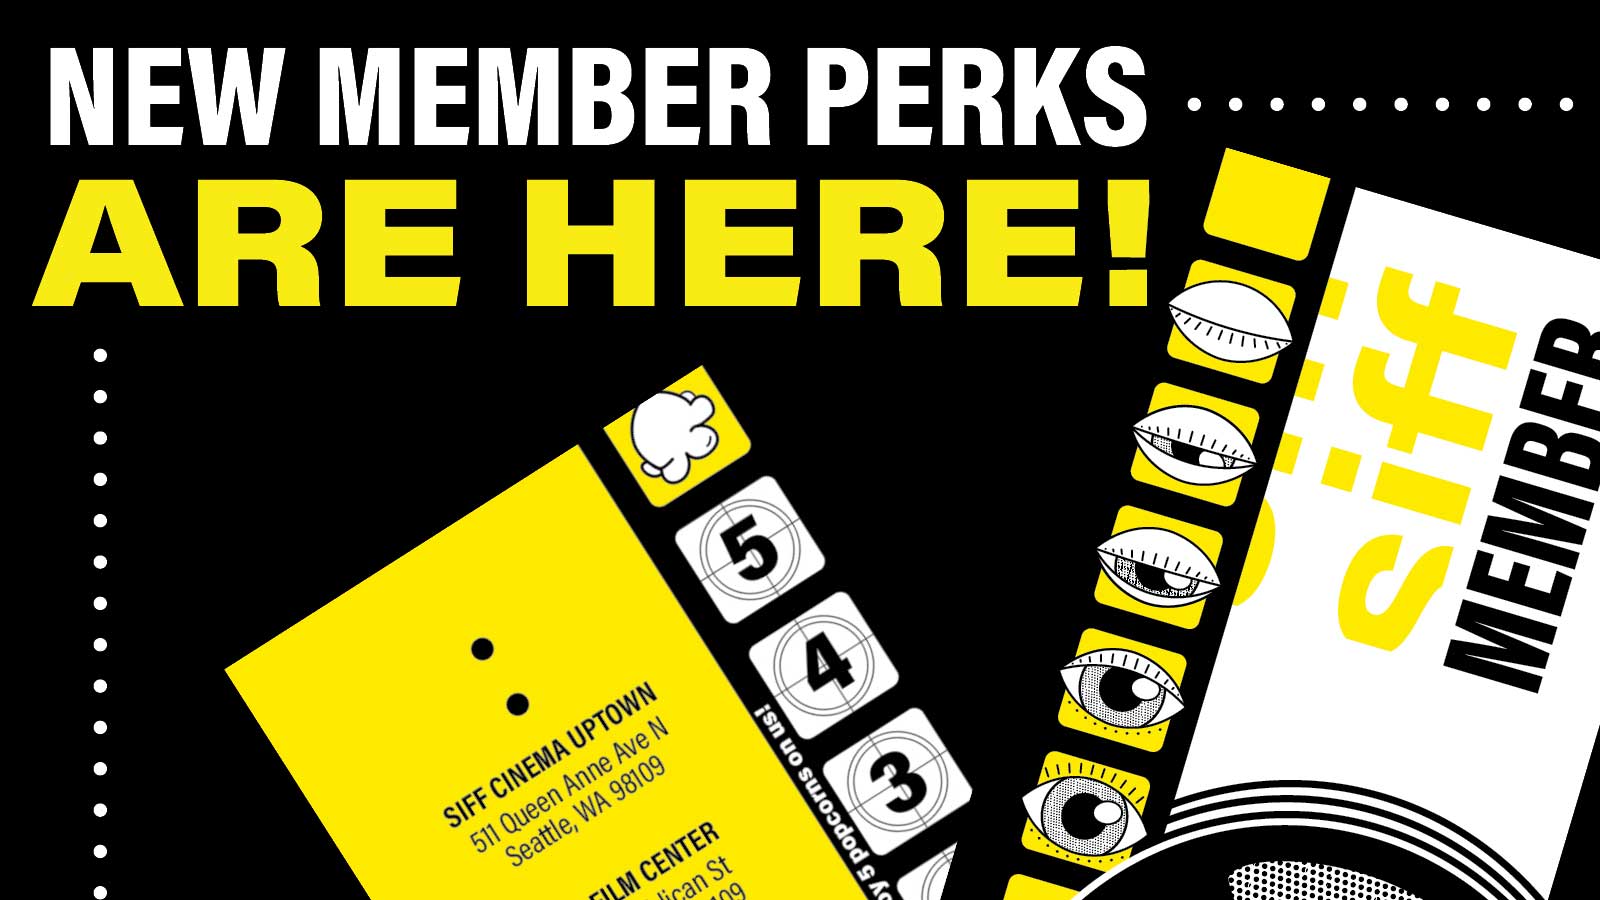 New Member Perks are Here